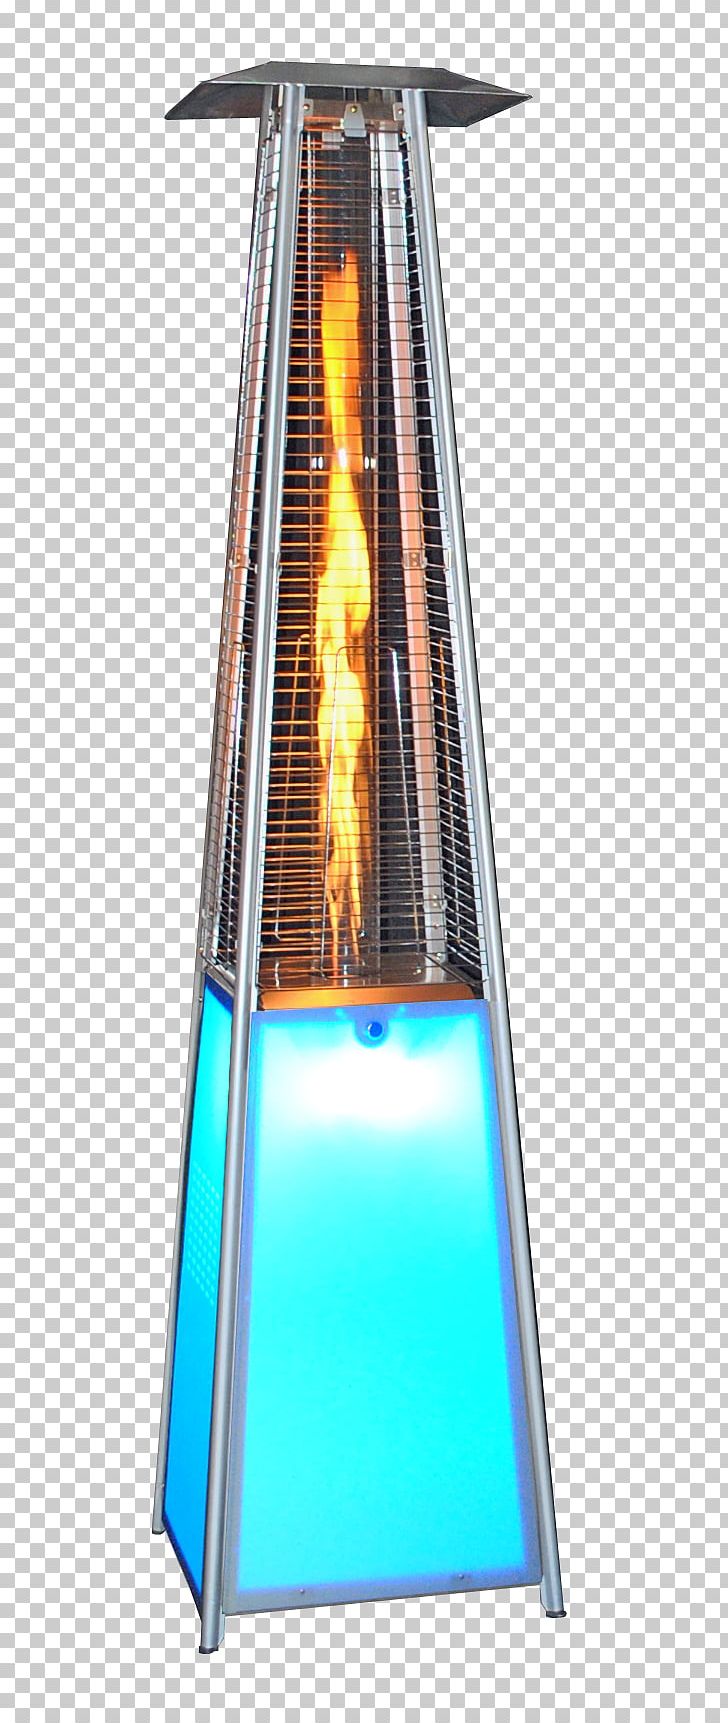 Patio Heaters Propane Gas Heater Light Outdoor Heating PNG, Clipart, Gas Heater, Heat, Heater, Infrared Heater, Led Free PNG Download